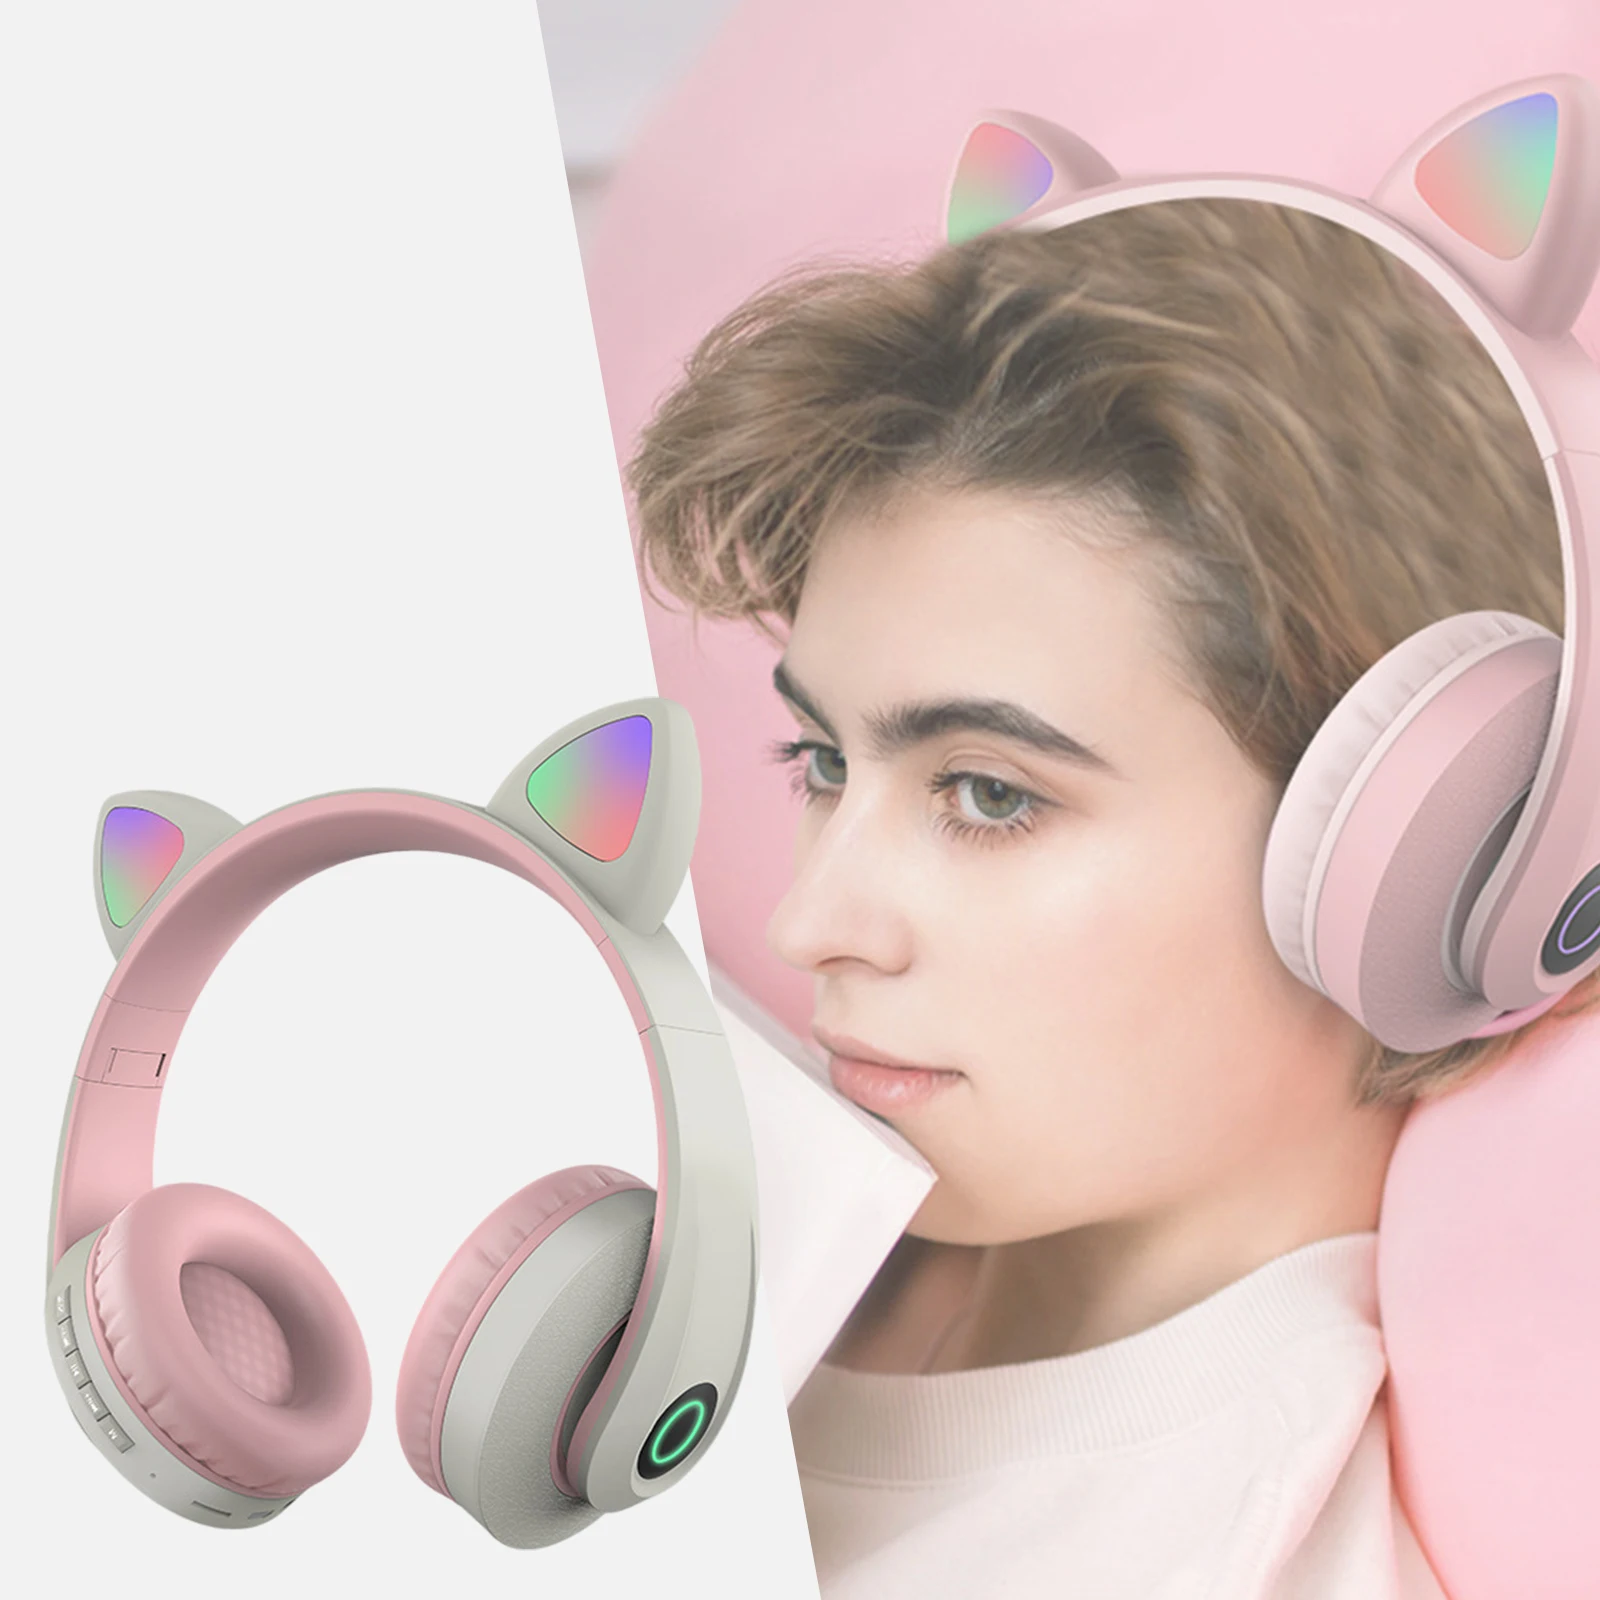 USB Cat Ear Surround Sound Wiredless Headset Headphones Bluetooth Control Noise Canceling Lightweight for Computer Games Laptop